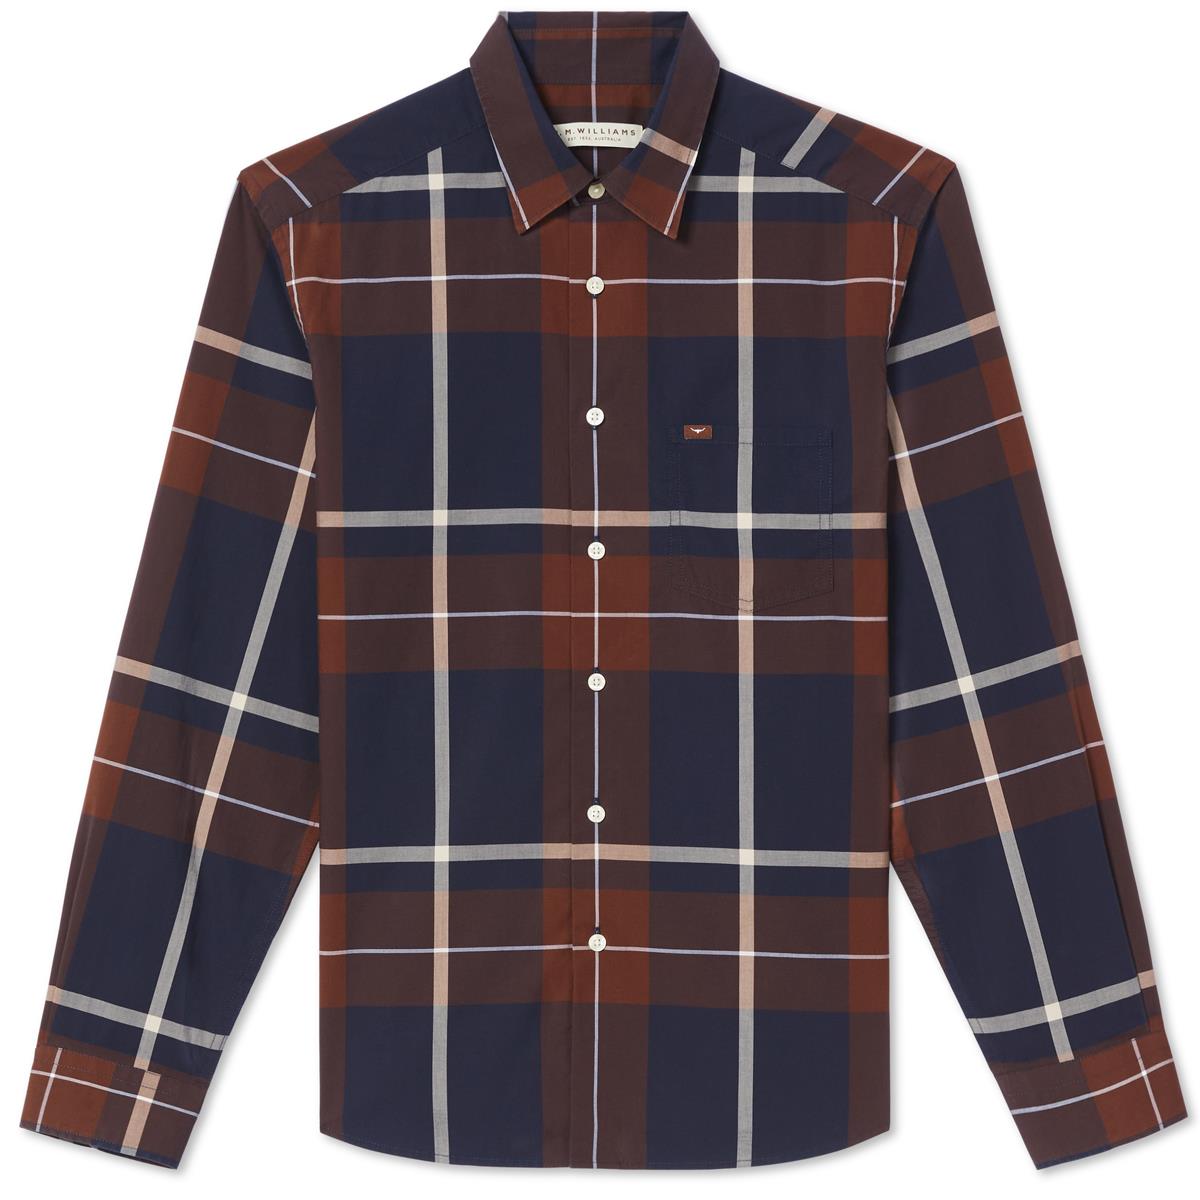 Is the R.M. Williams Mens Coalcliff Shirt made from cotton material?